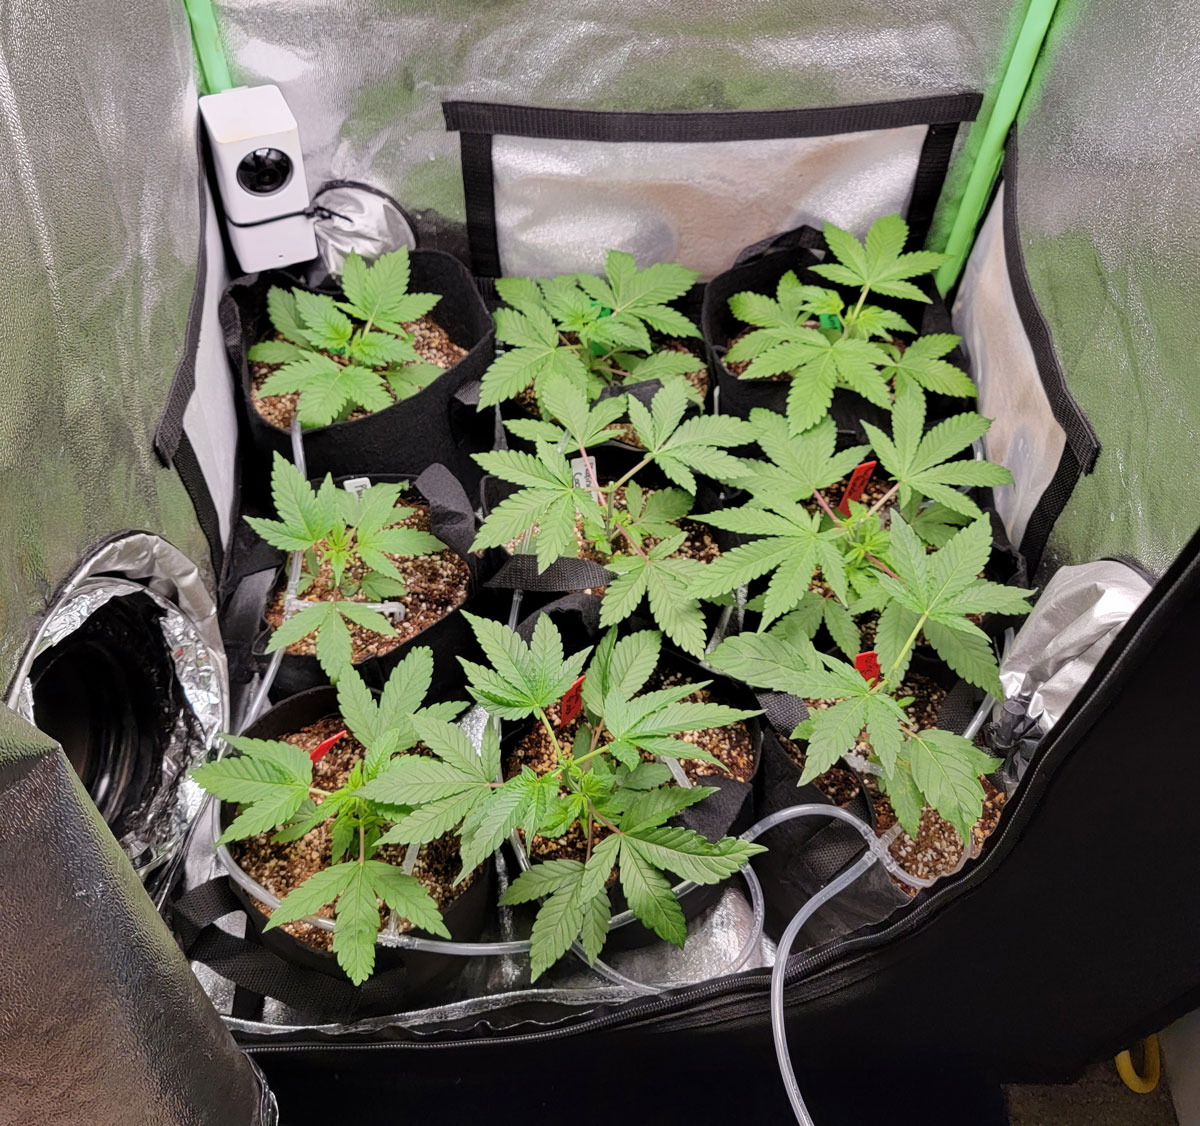 https://www.growweedeasy.com/wp-content/uploads/2022/02/auto-watering-cannabis-plants-on-vacation.jpg